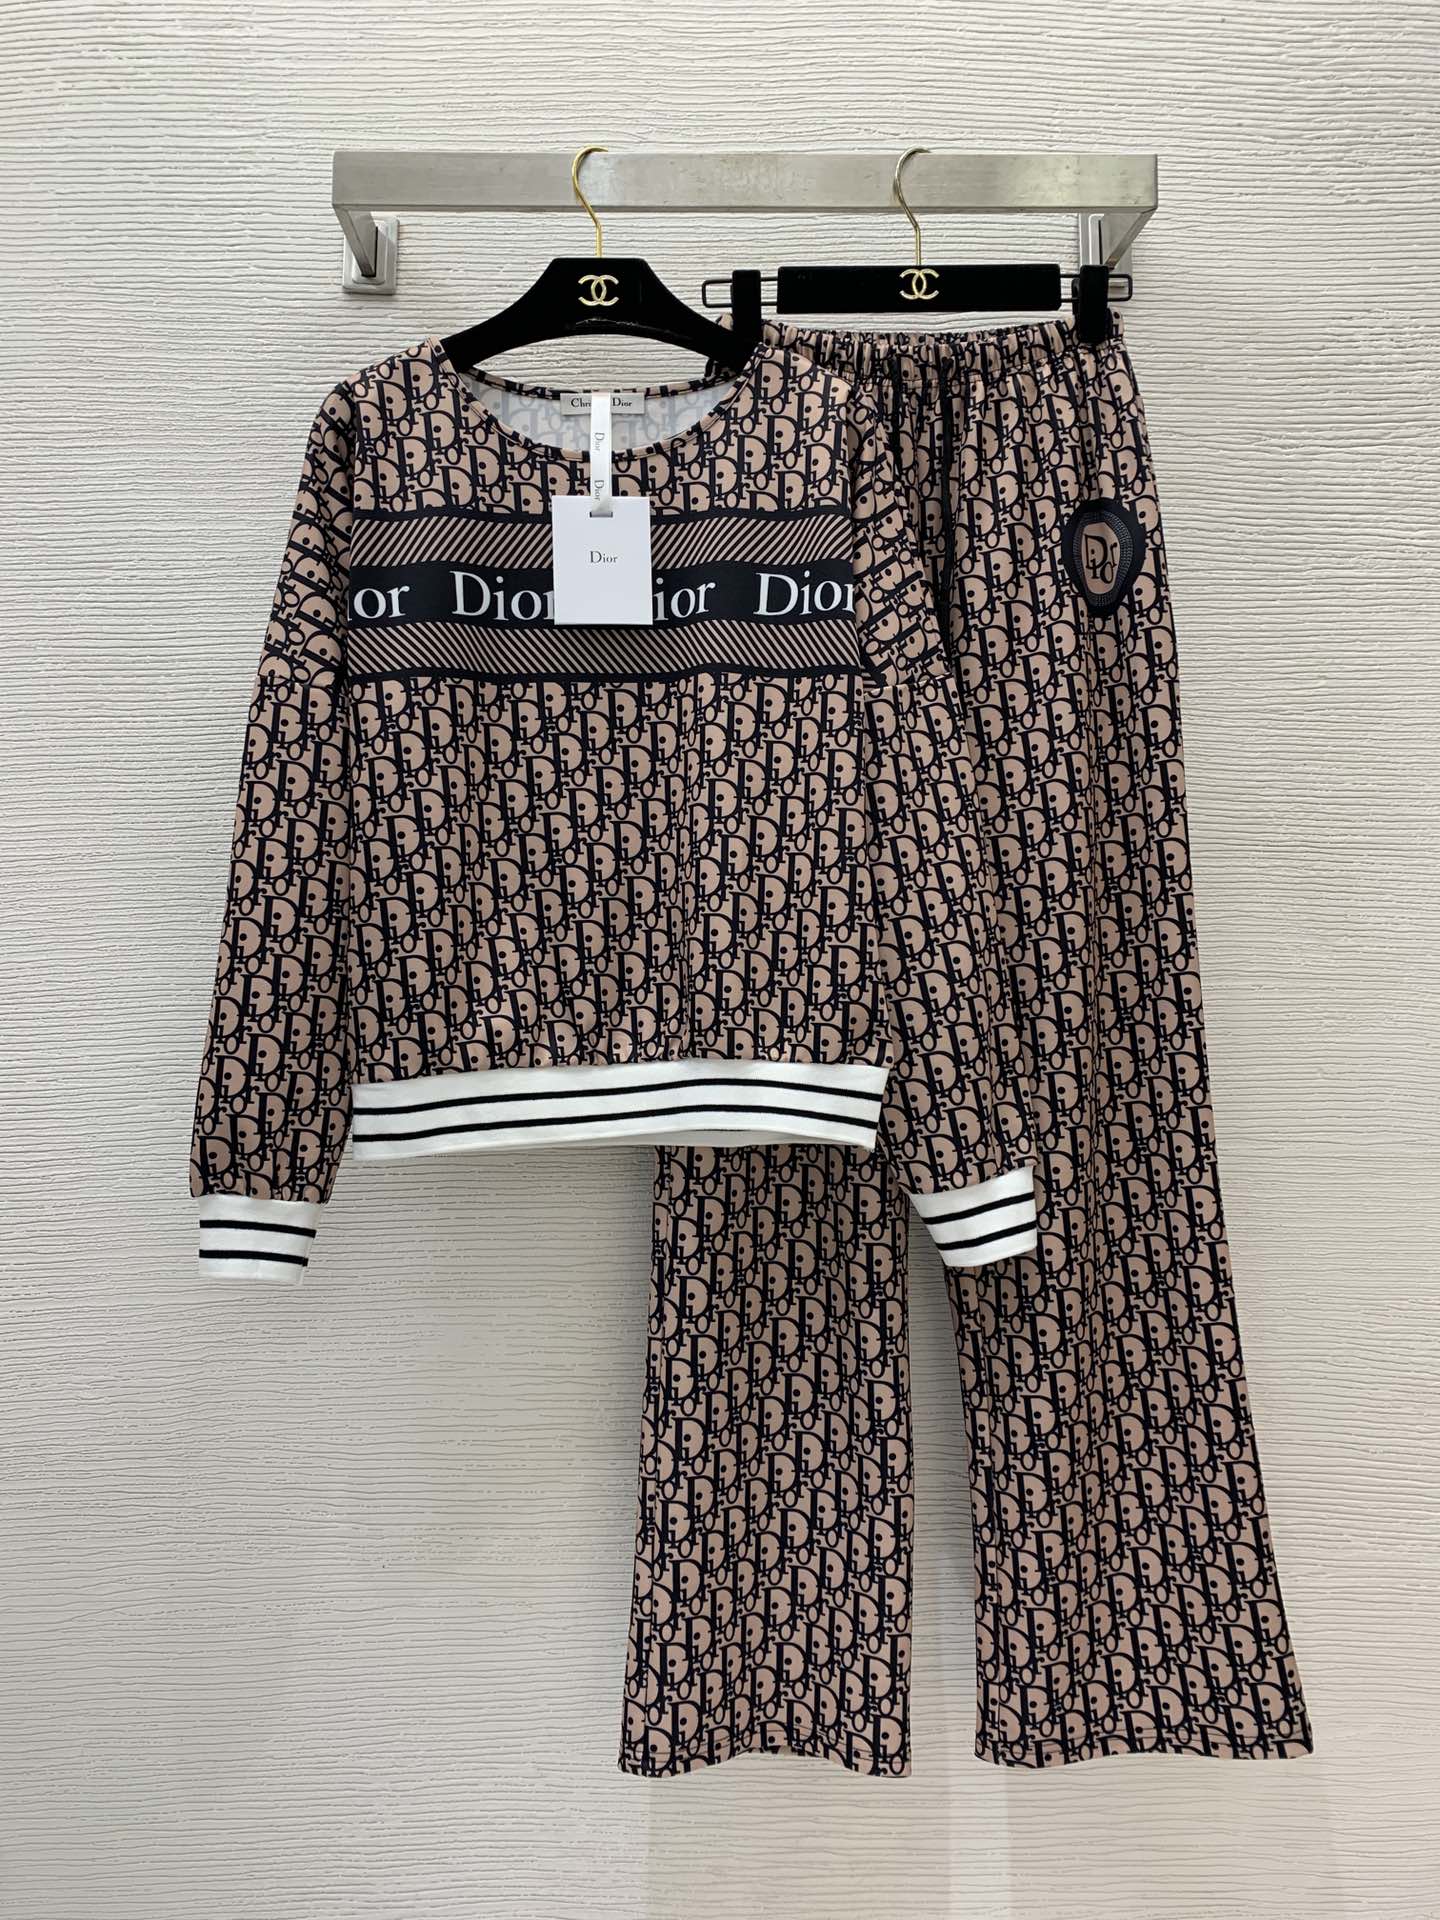 Dior Clothing Pants & Trousers Shirts & Blouses Two Piece Outfits & Matching Sets Black Blue Brown Printing Spring/Summer Collection Long Sleeve